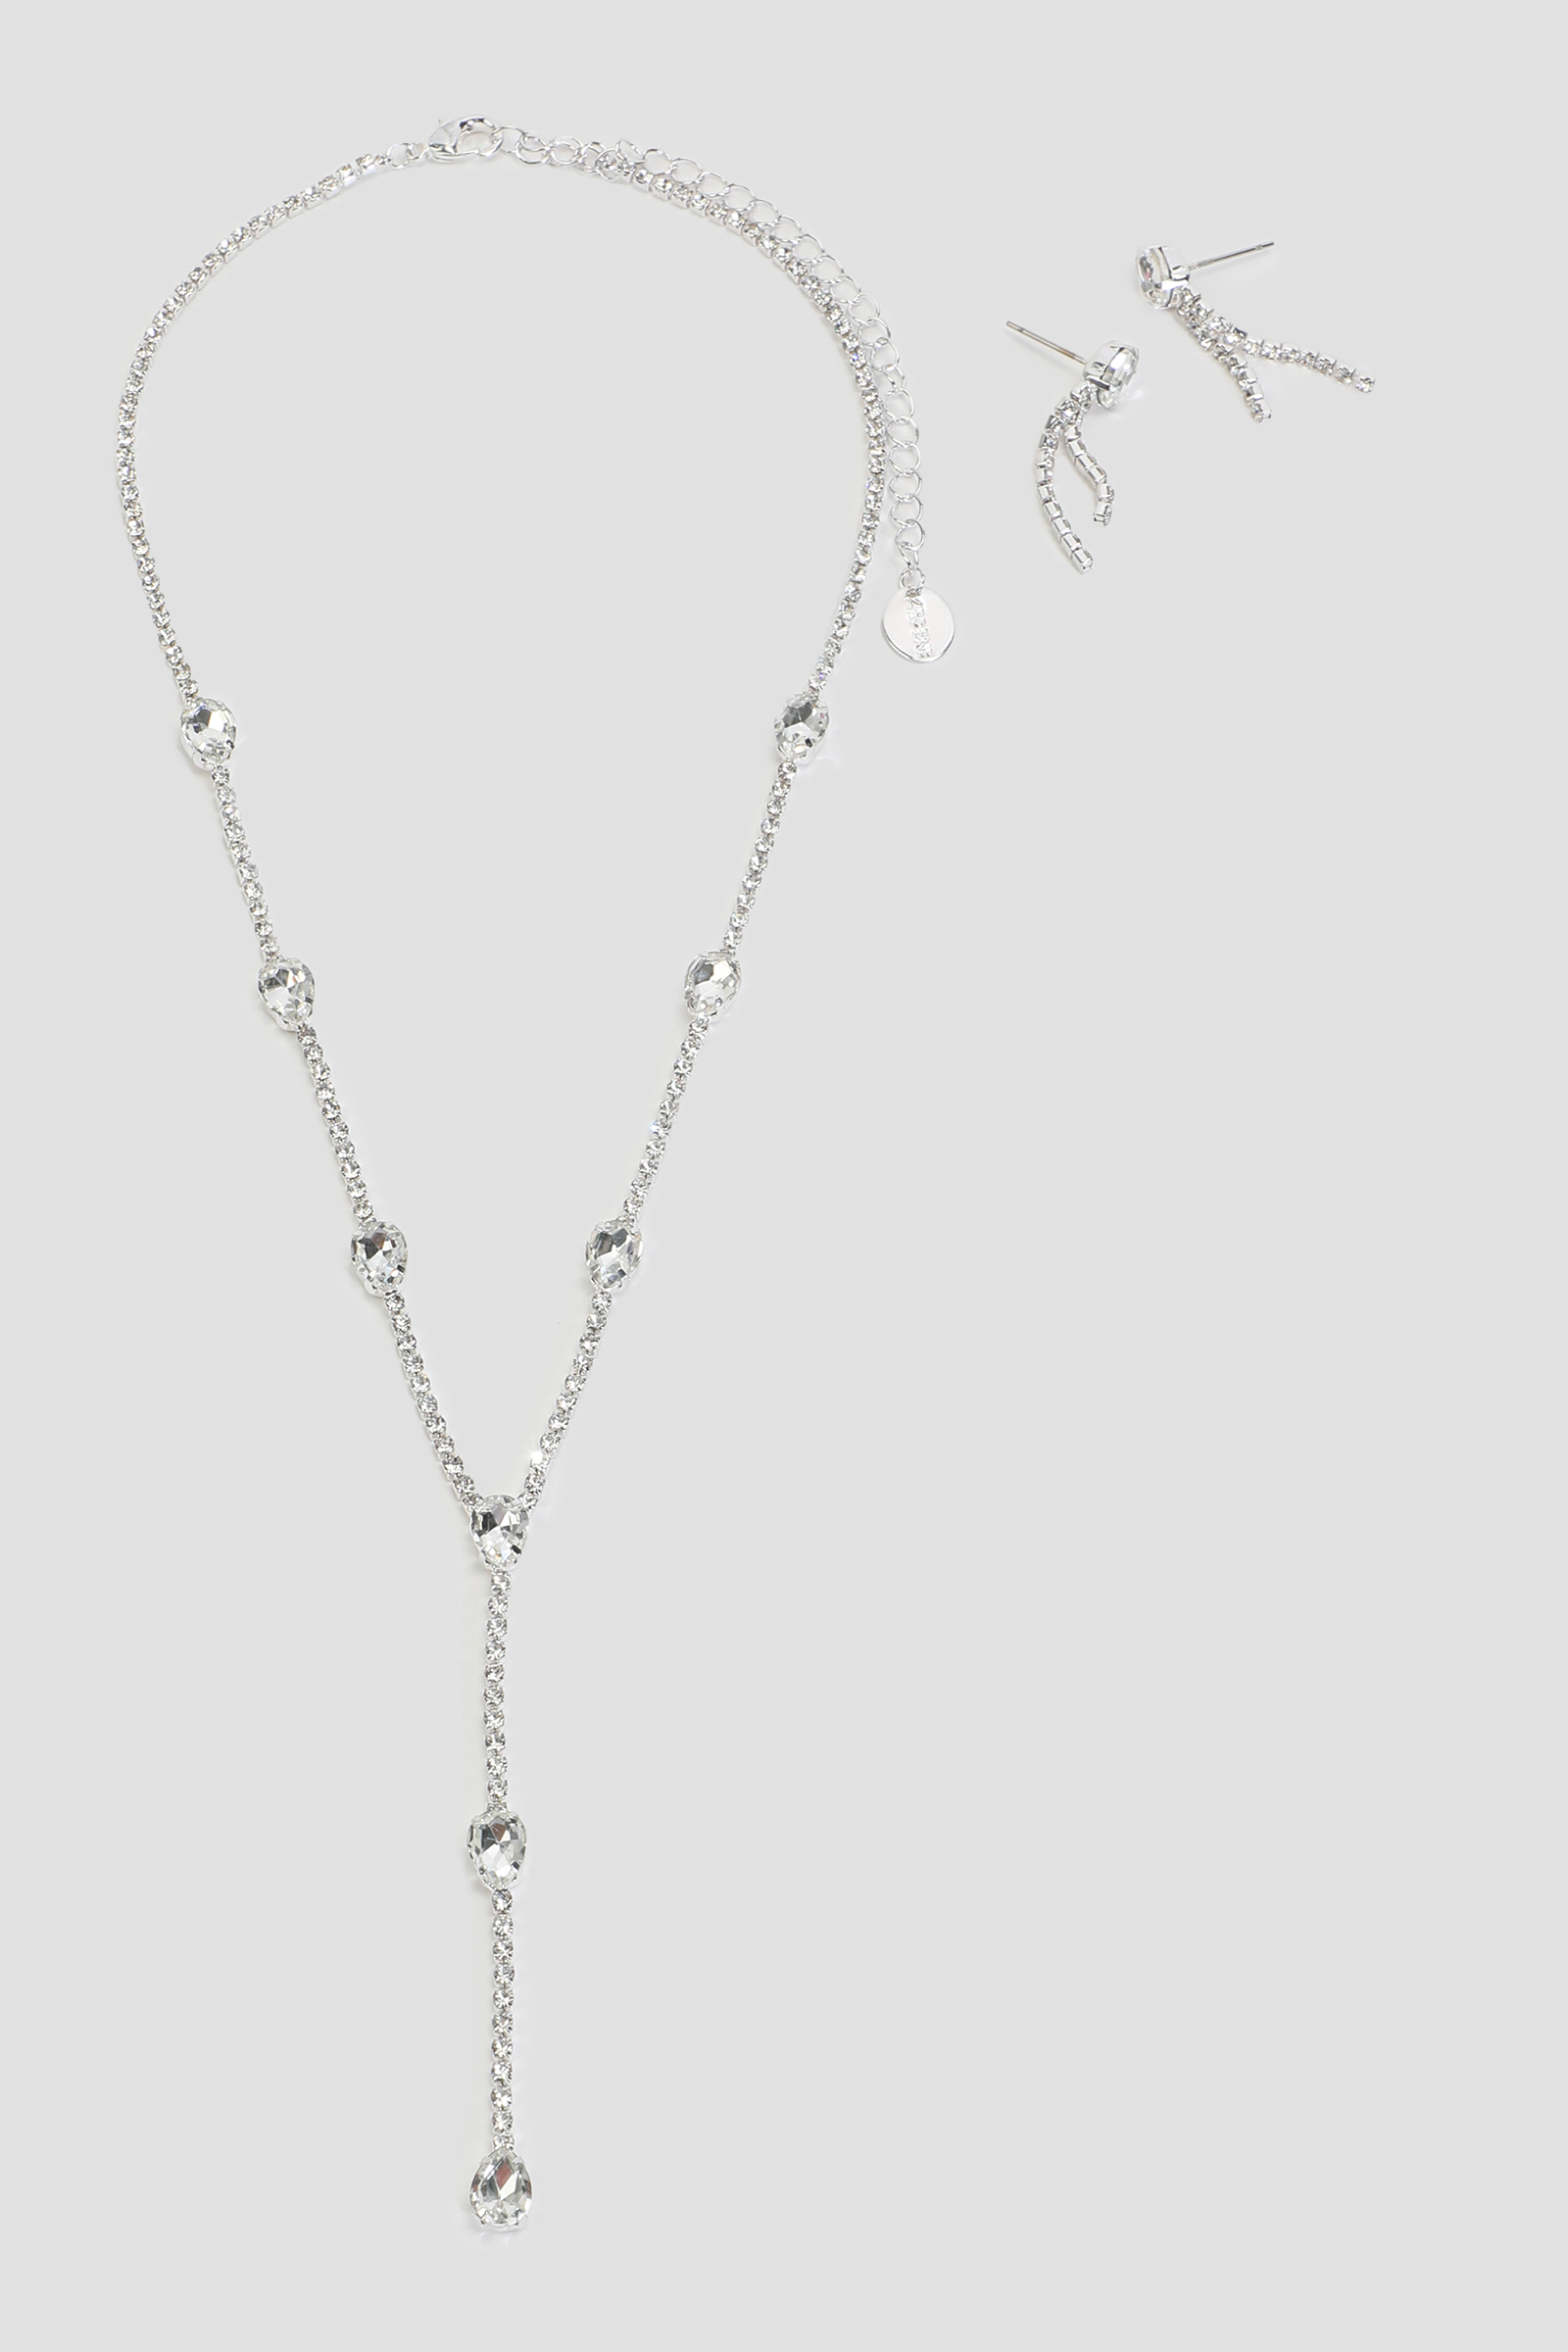 Ardene Y-Shape Necklace and Earring Set in Silver | Stainless Steel